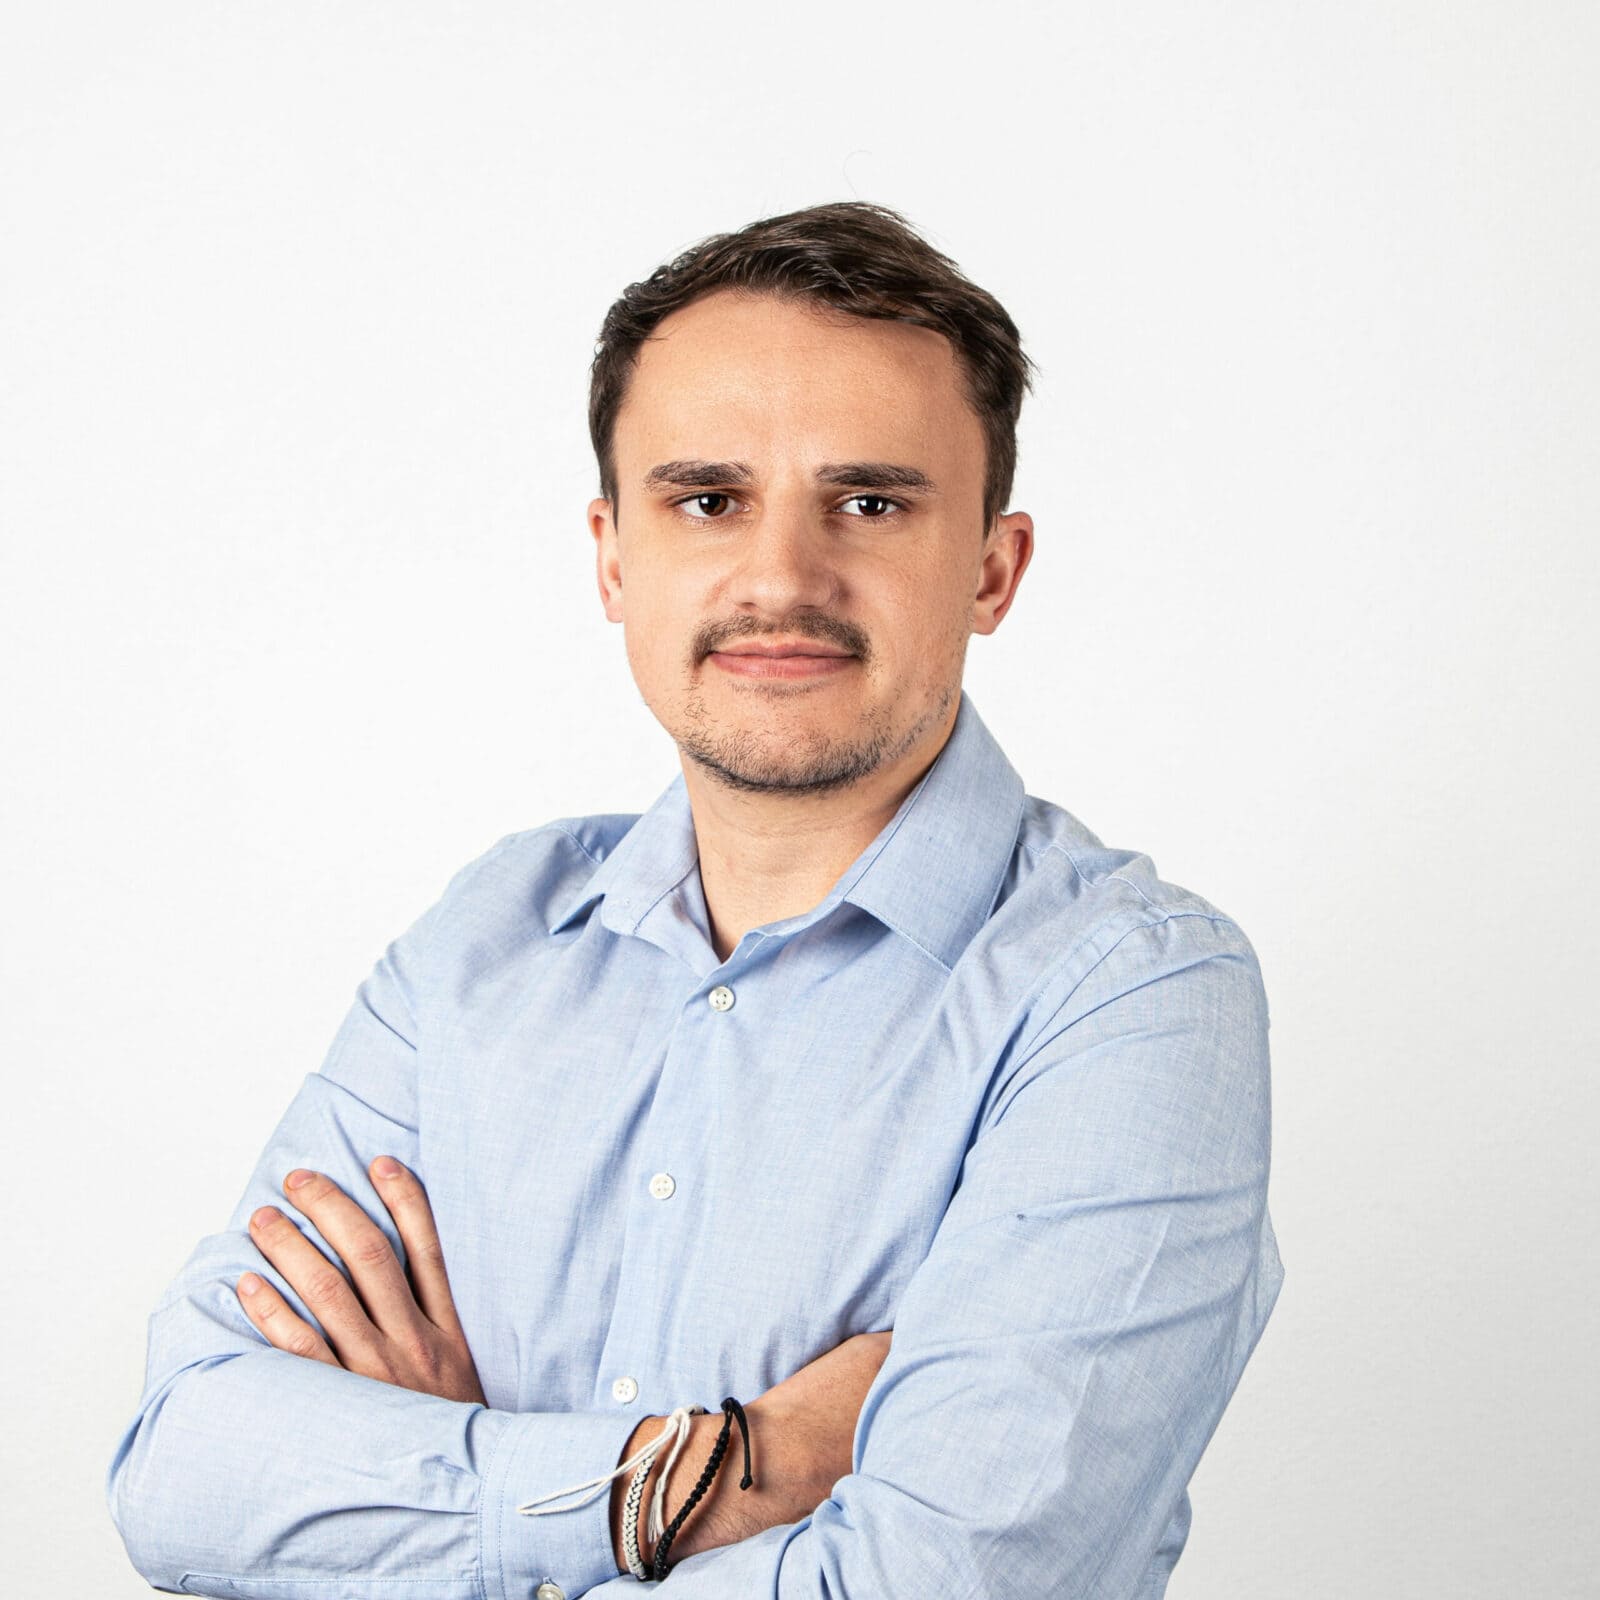 Professional portrait of Marco Zihlmann from MOBATIME